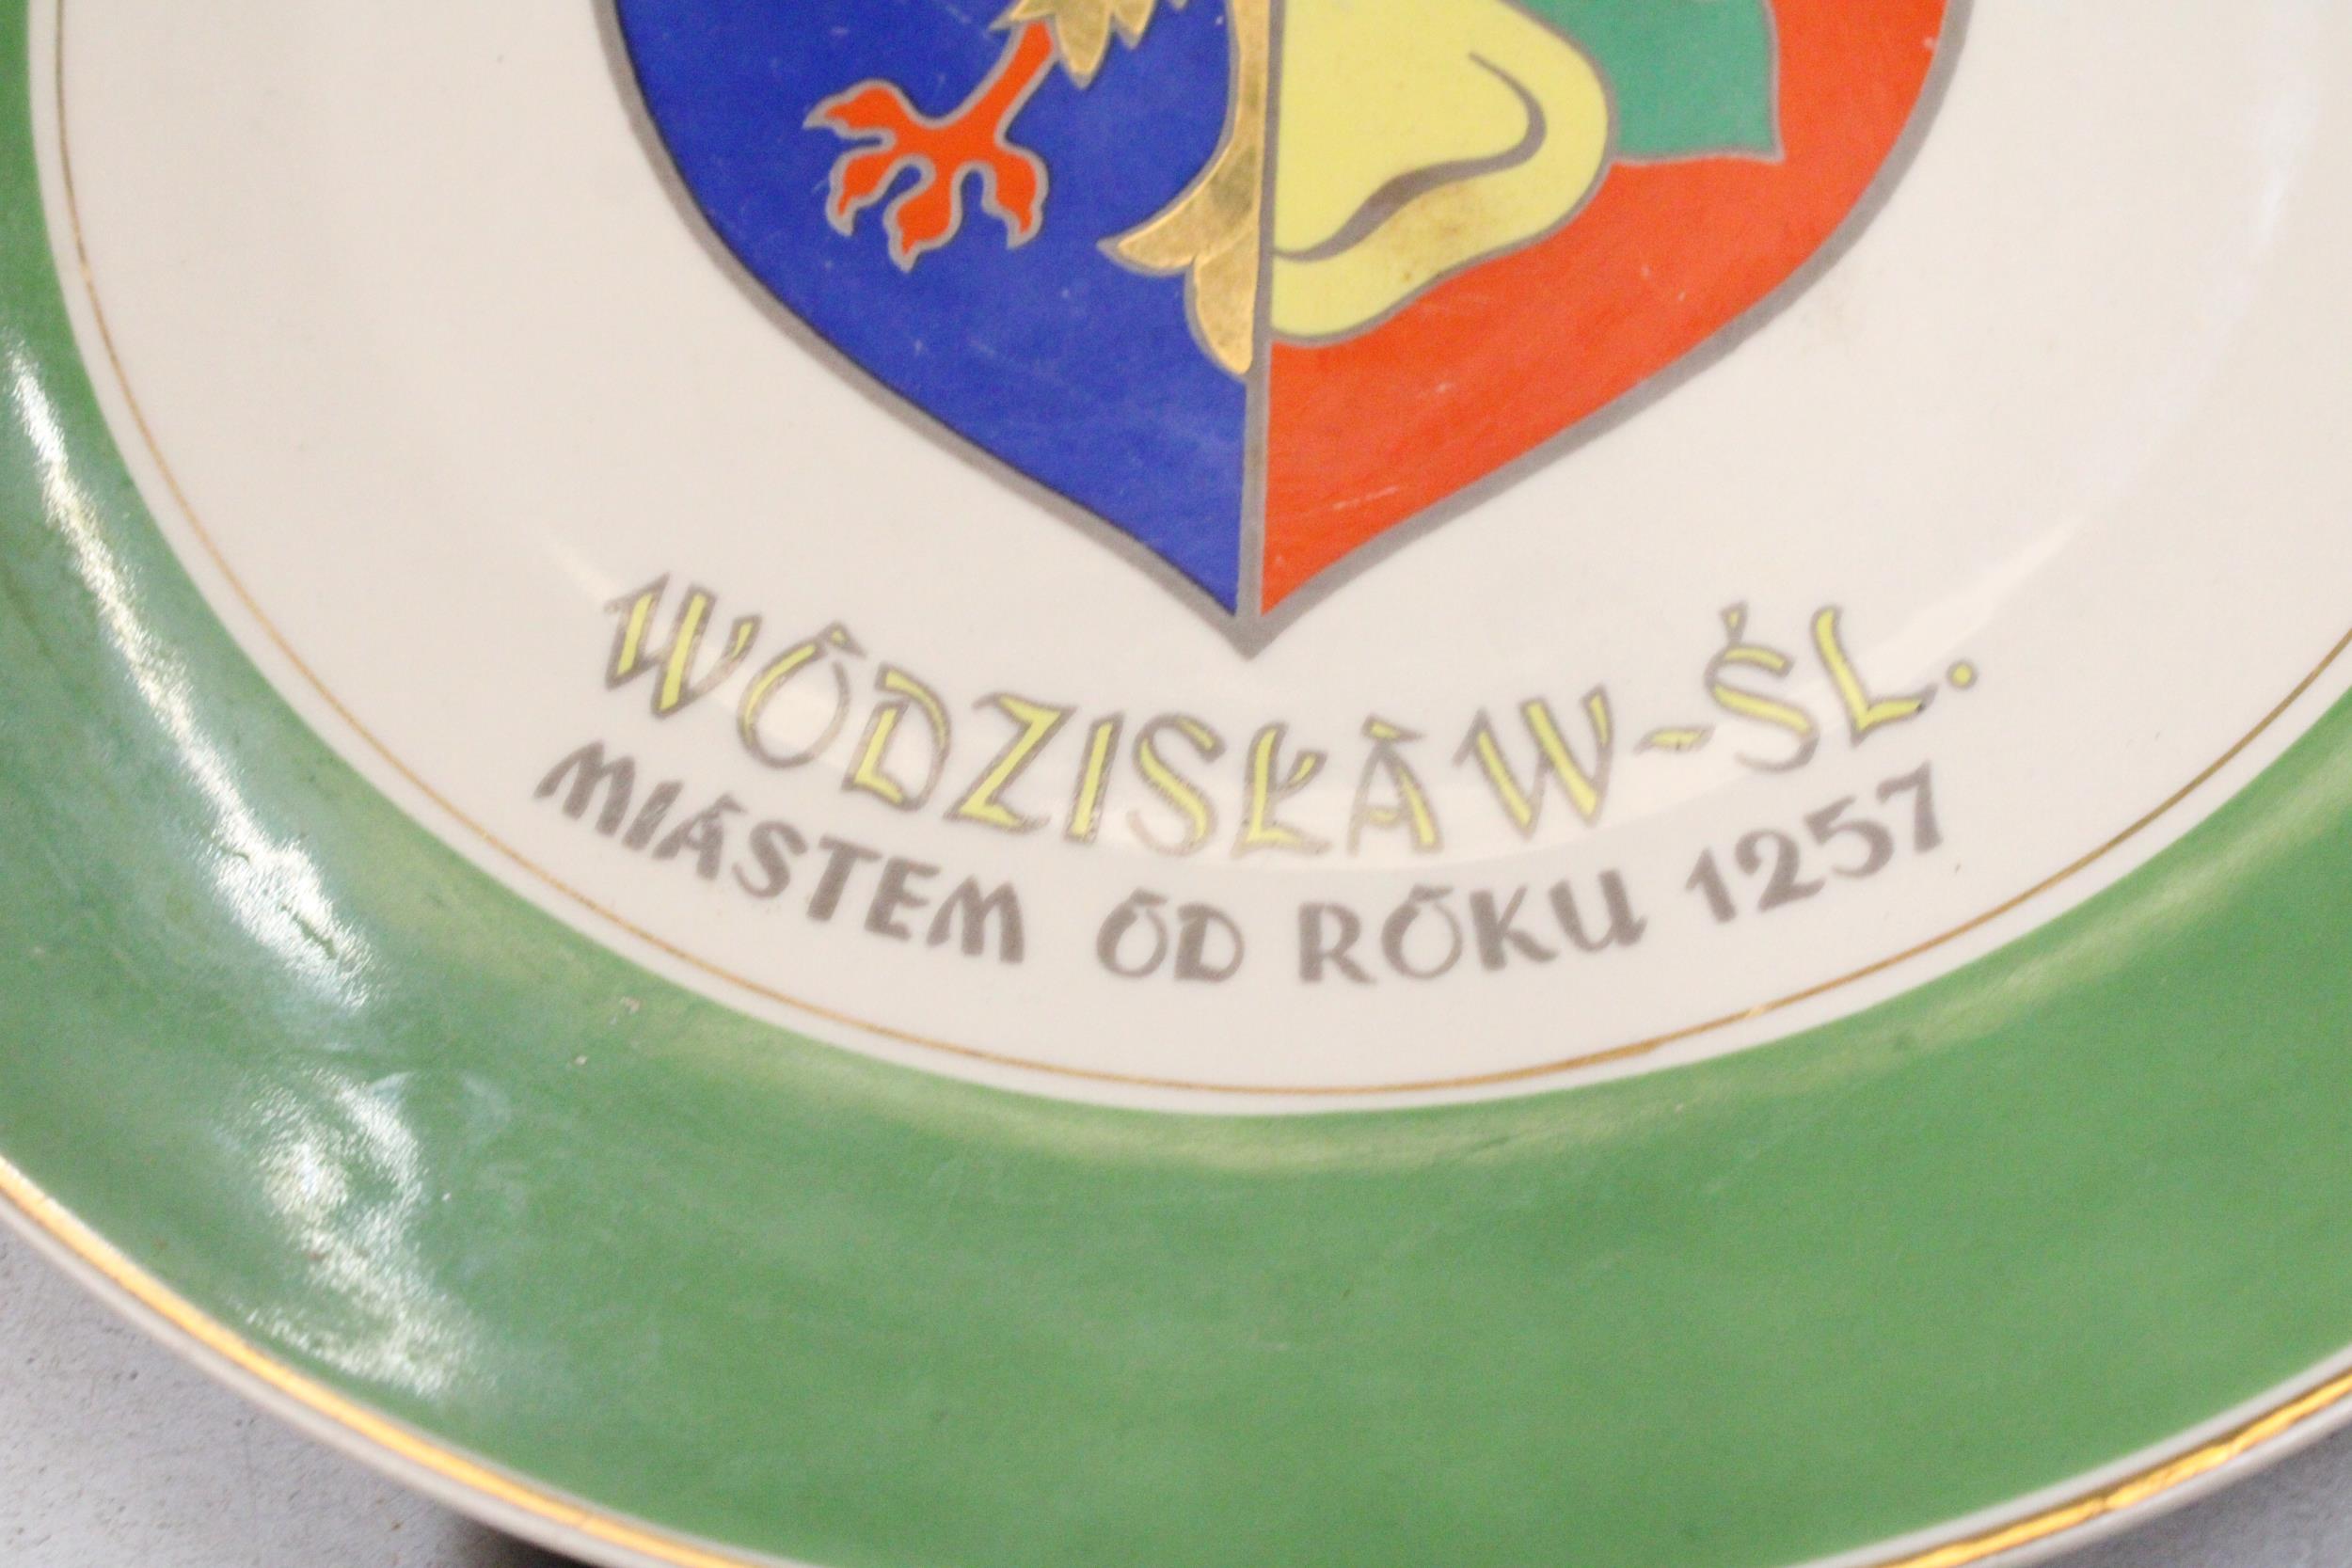 A TULOWICE P. T. POLAND PLATE AND A SIGNED DOG PLATE - Image 6 of 6